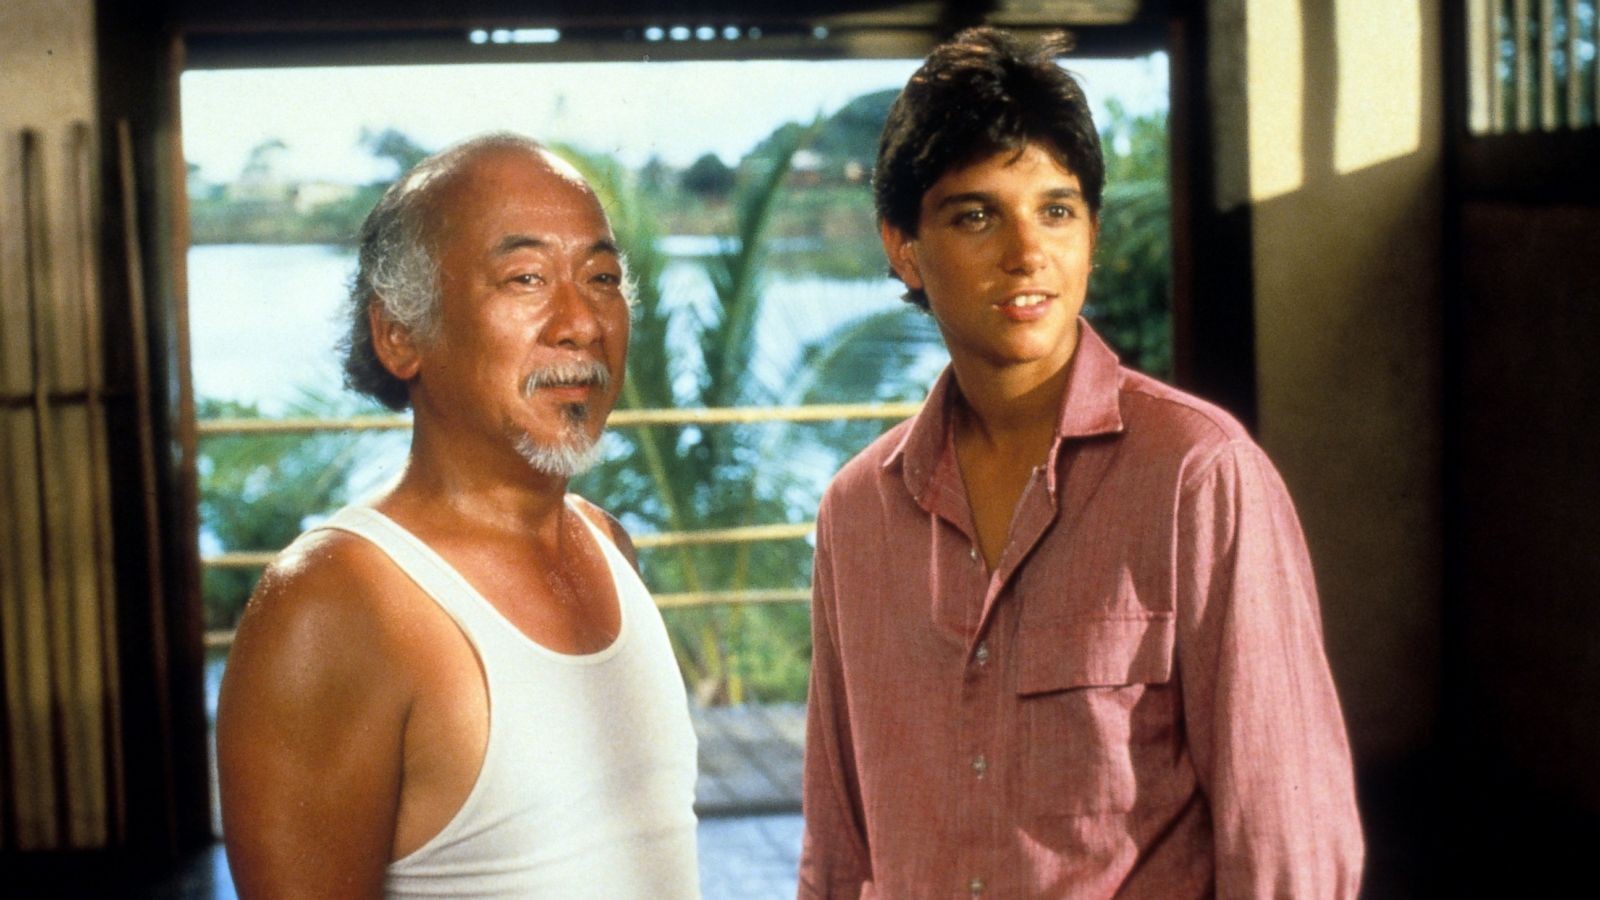 Ralph Macchio and Pat Morita from the sceme in The Karate Kid